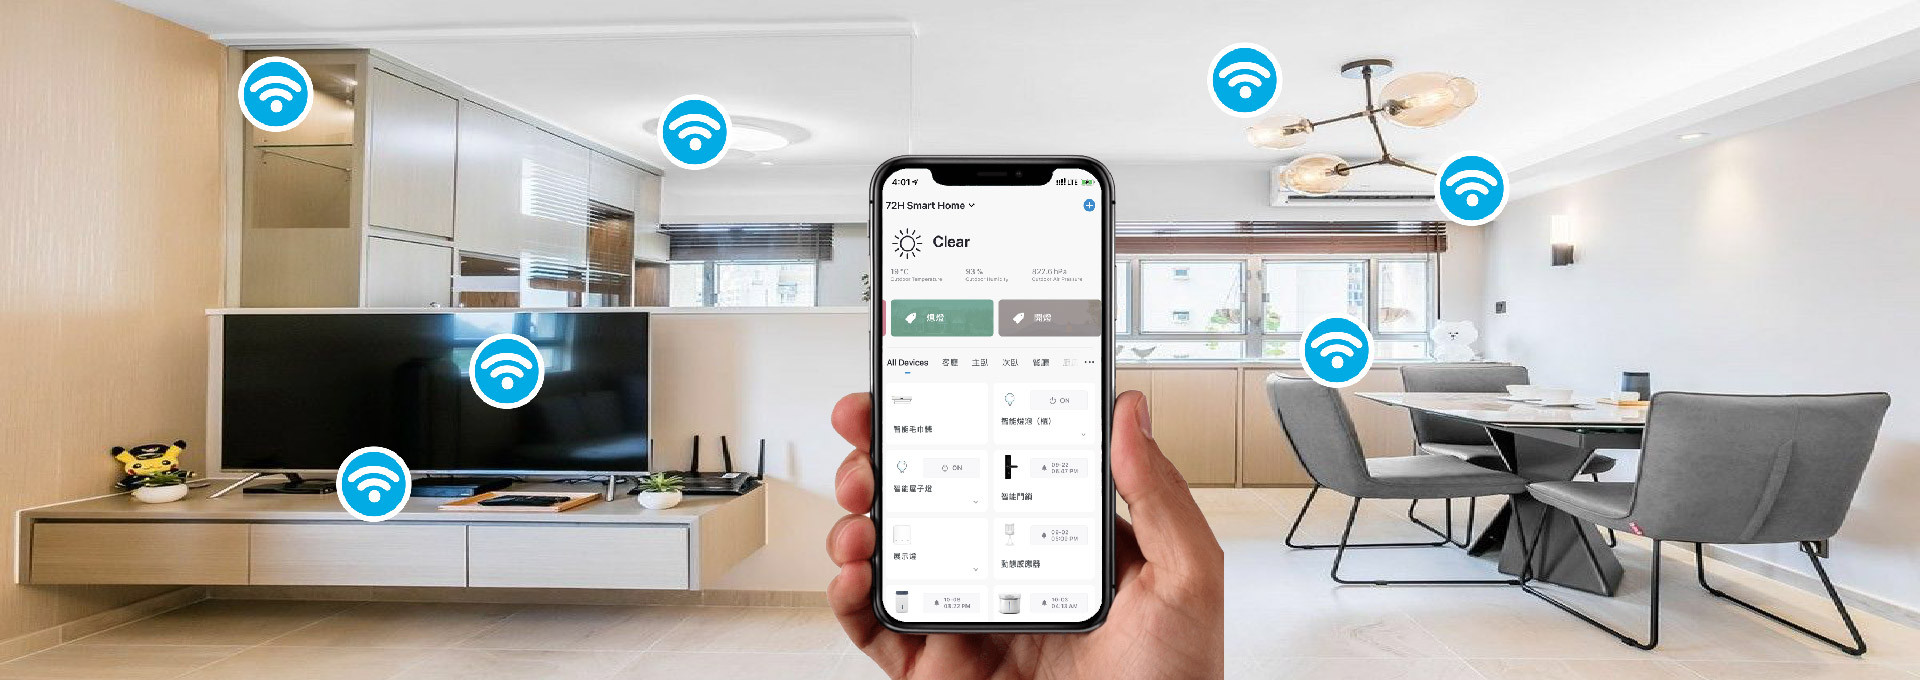 Welcome to Smart Home!